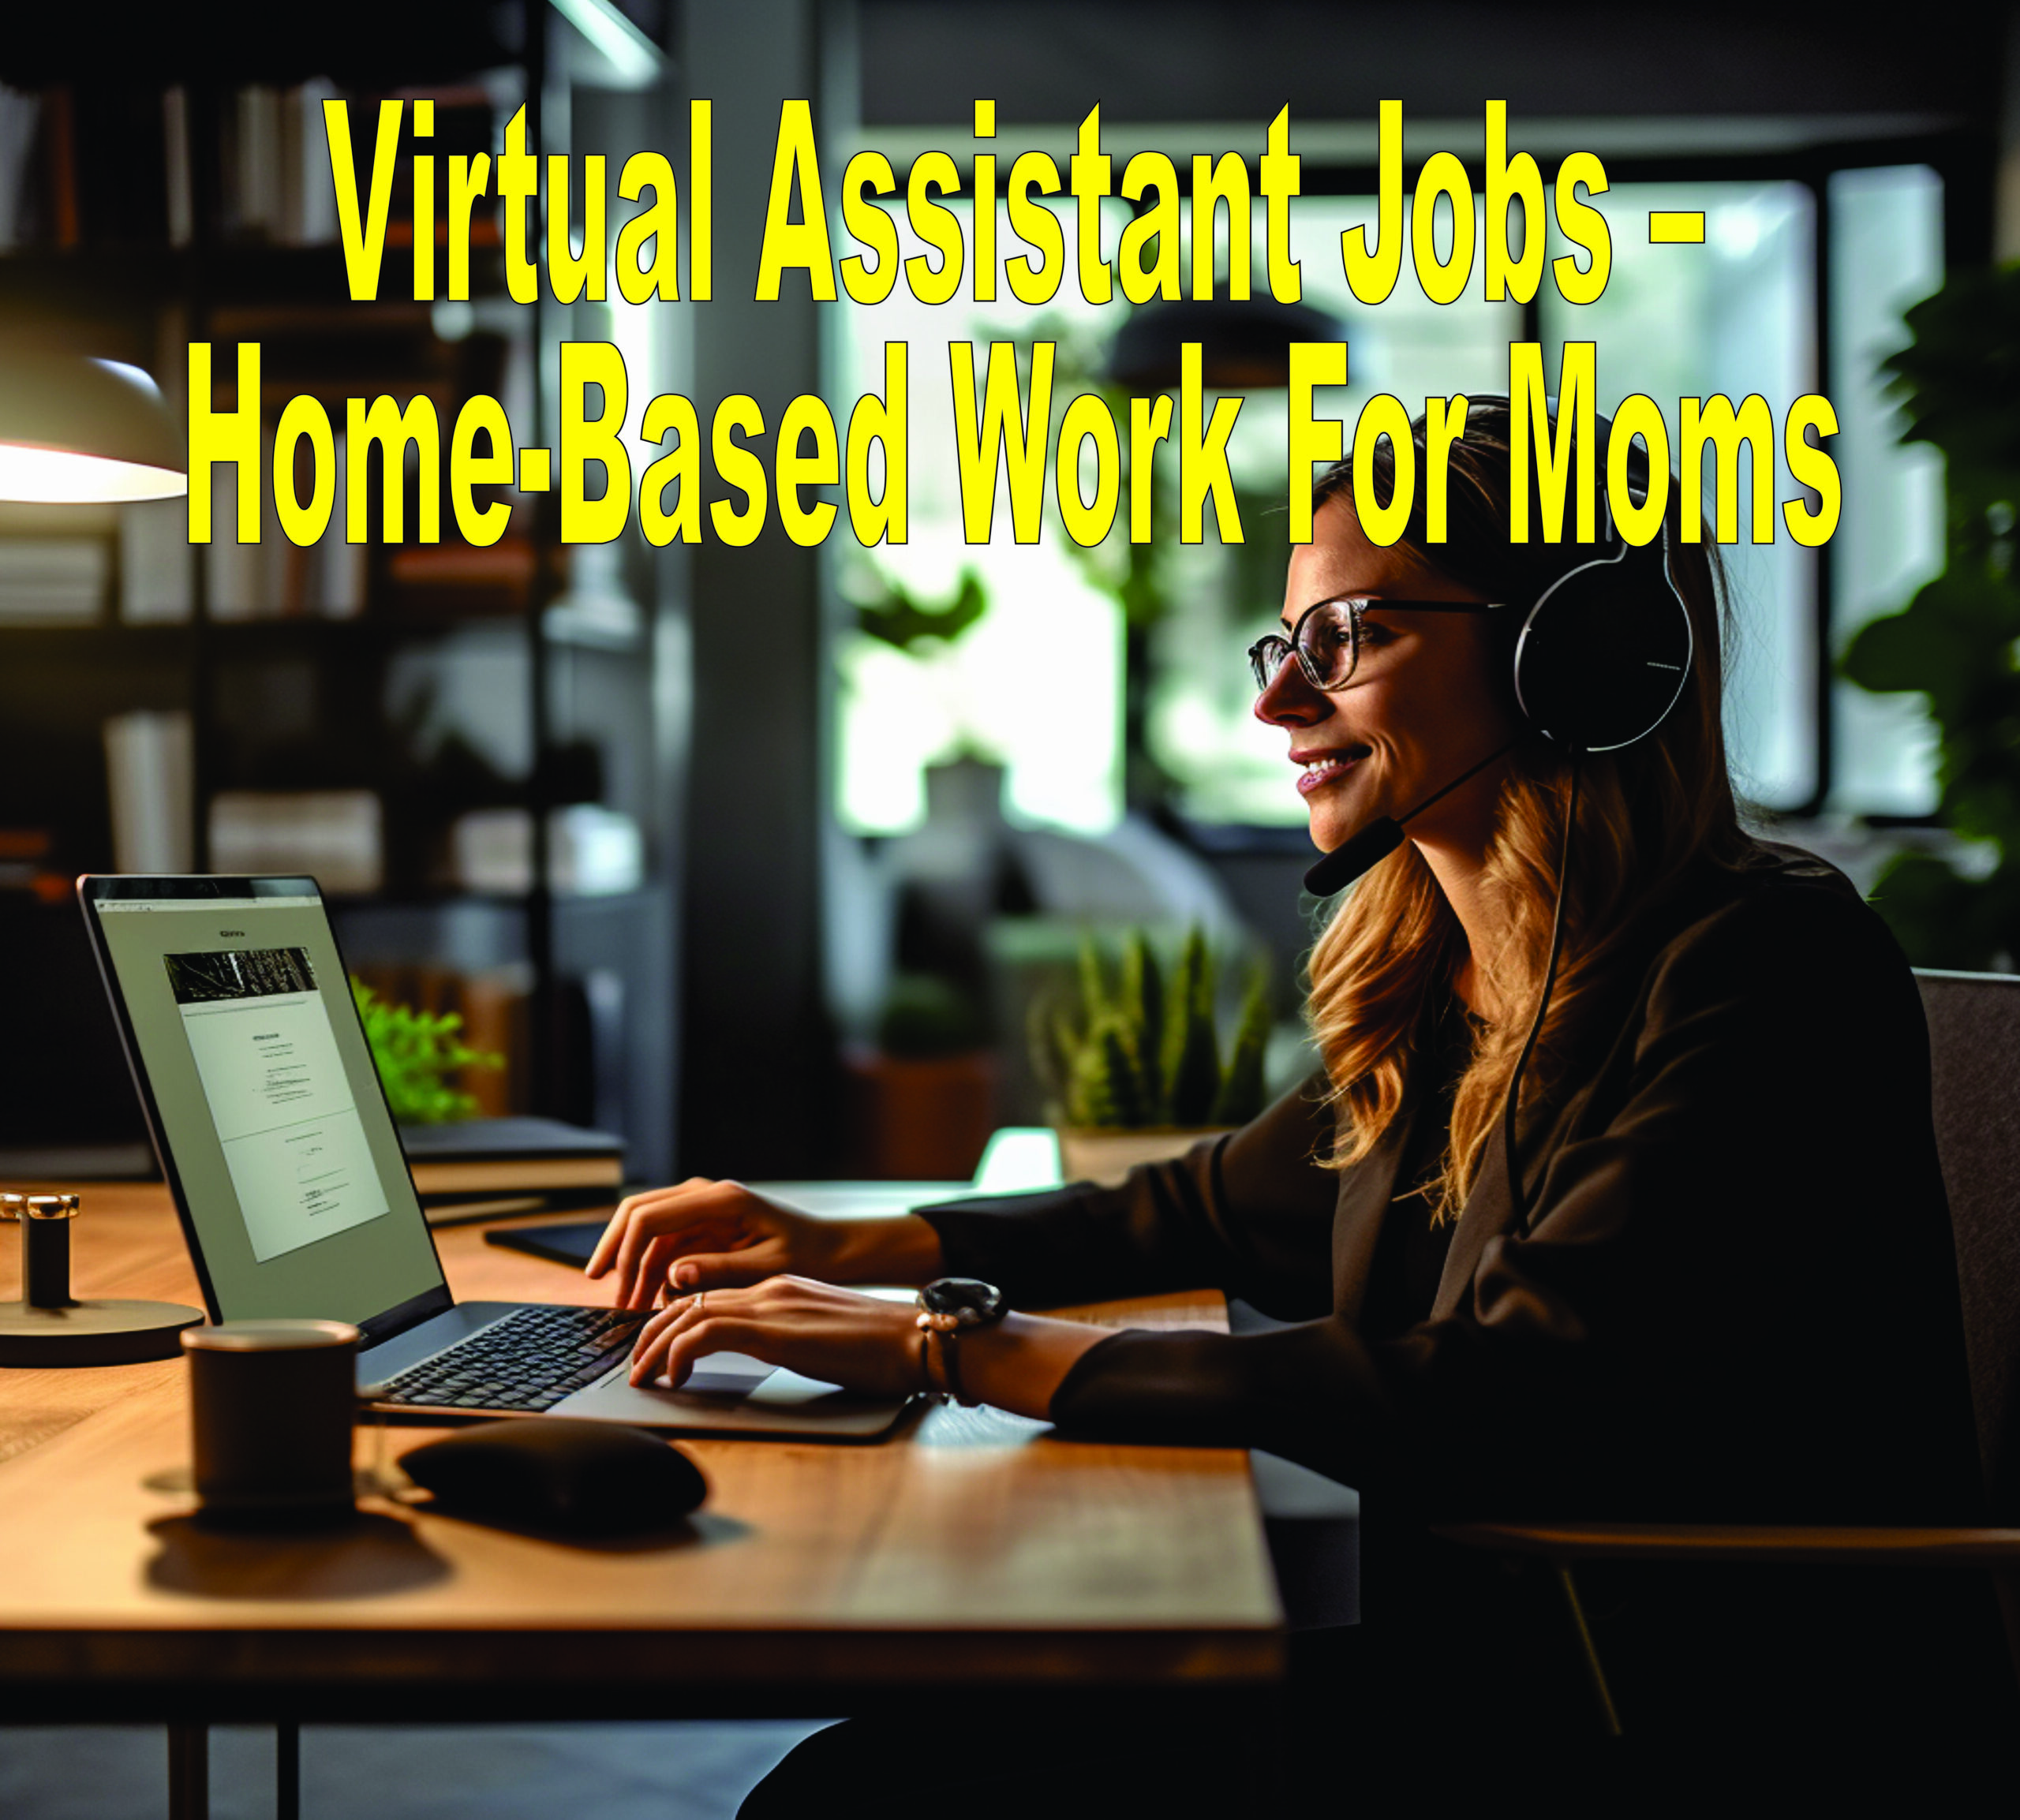 Virtual Assistant Jobs – Home Based Work For Moms